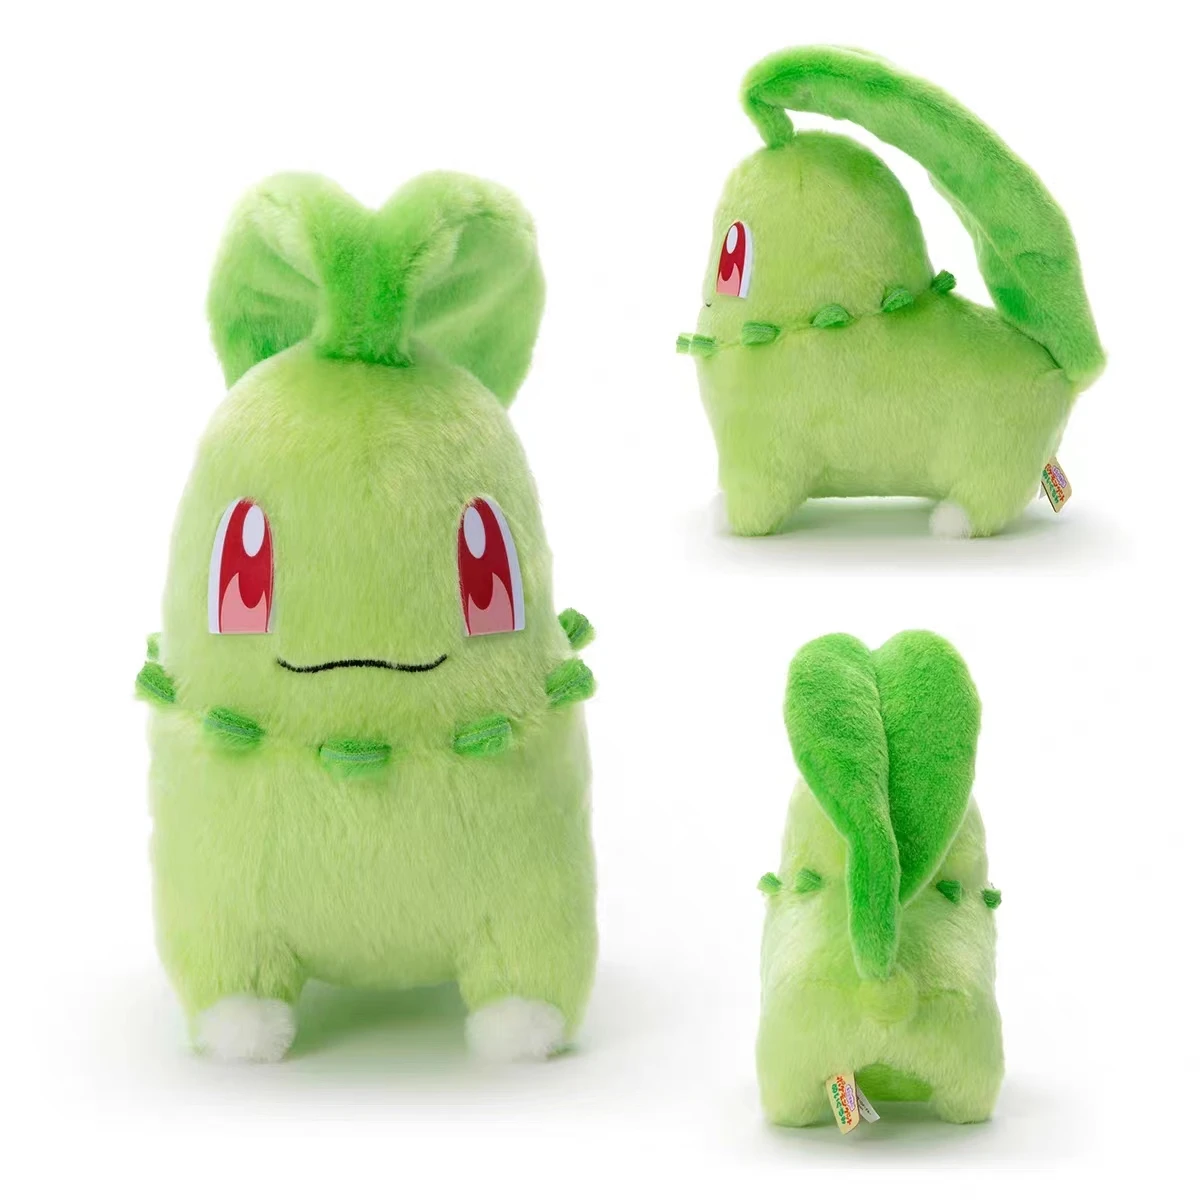 style living room desktop flowing water ornaments circulating water office water system landscape decoration ceramic humidifier 20cm Anime Pokemon Chikorita Stuffed Kawaii Plush Toys Room Decoration Ornaments Gift for Children Toys